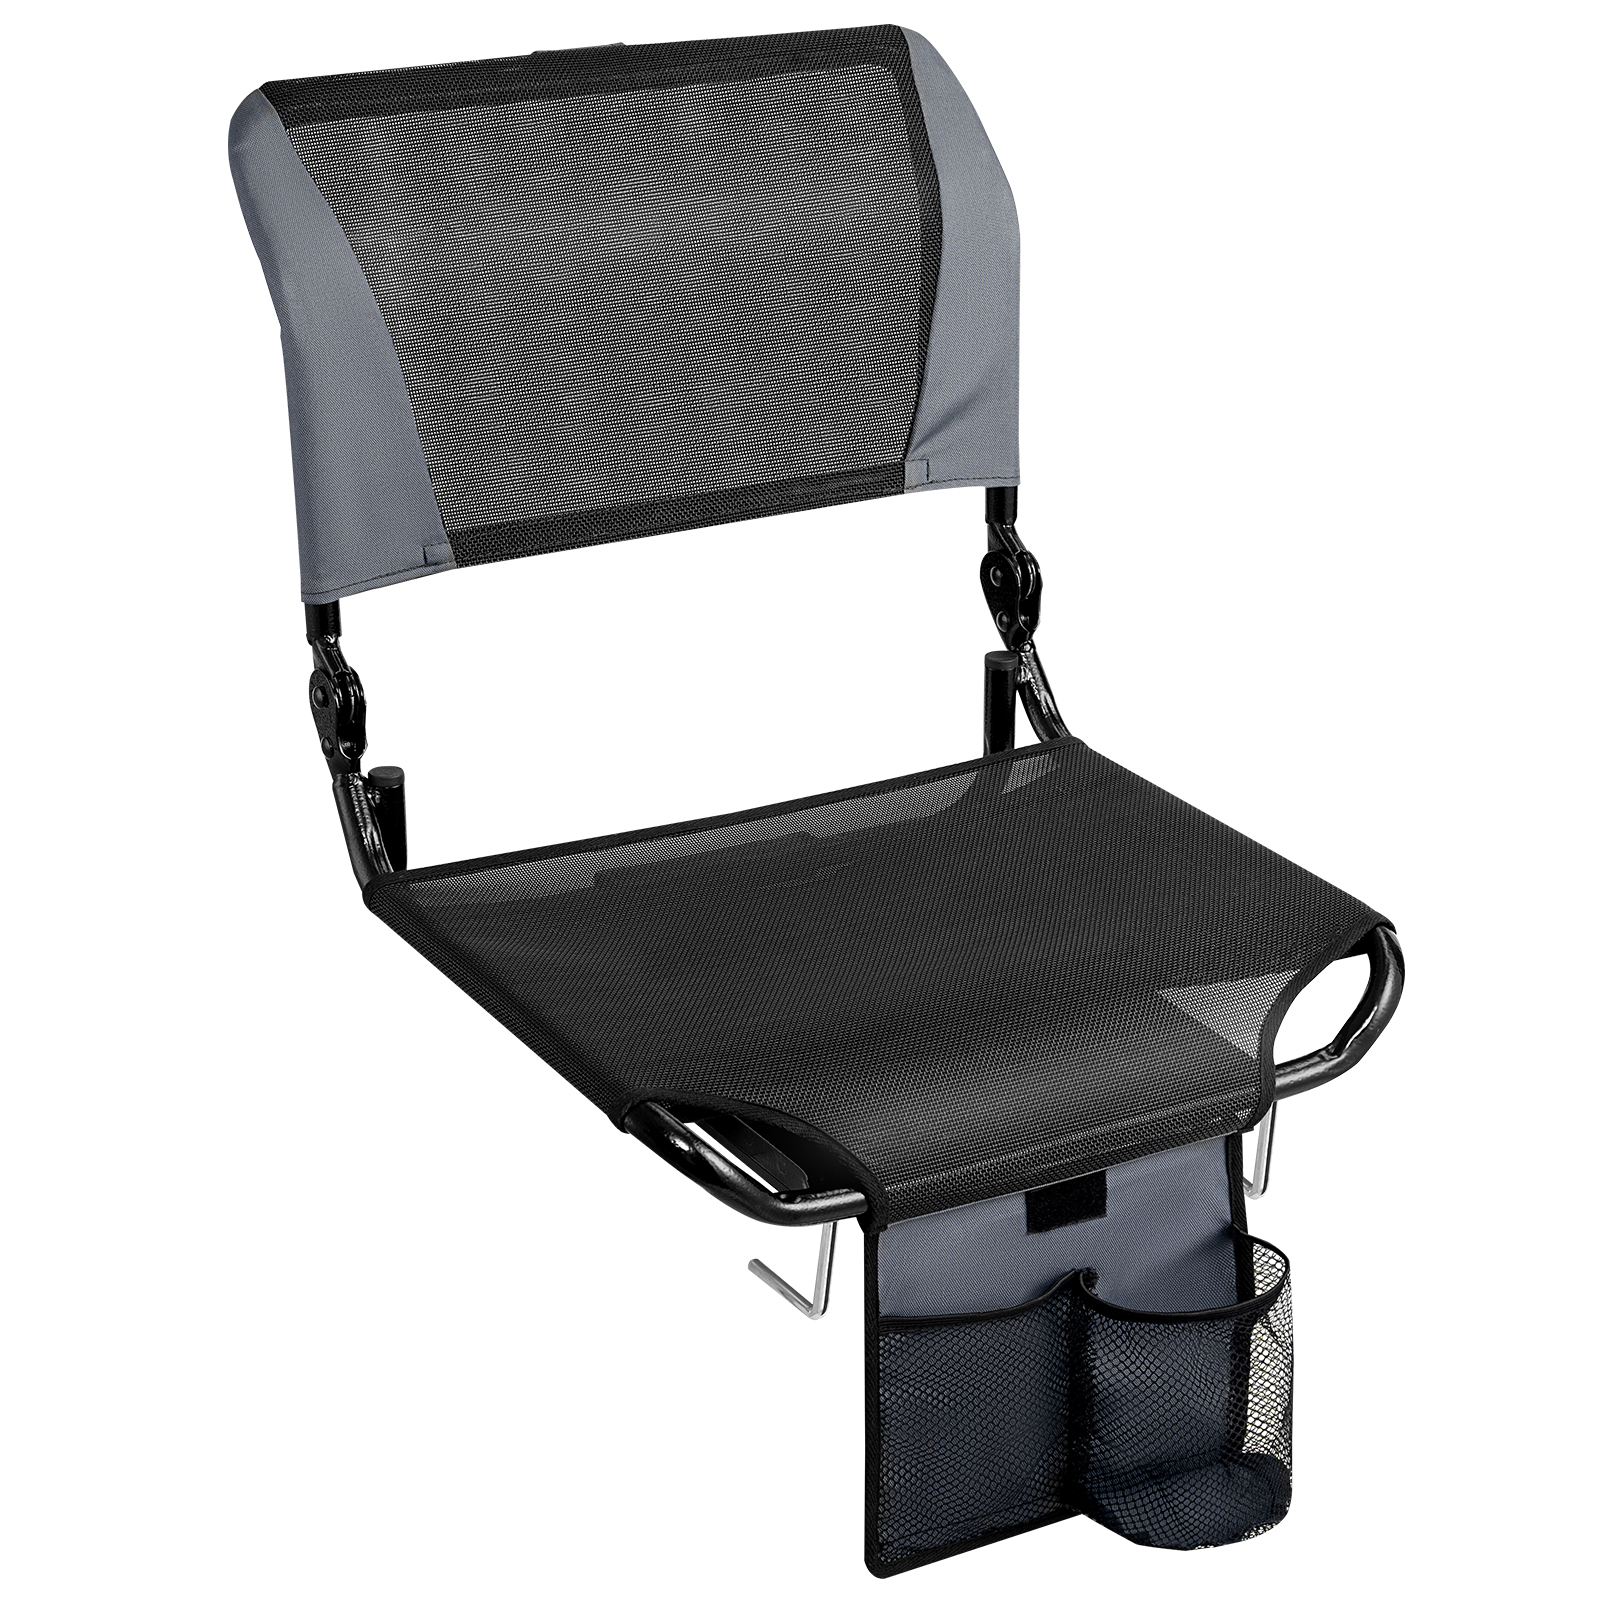 TOPSKY Mesh Stadium Seat Lightweight, Portable Folding Chair with 3 Reclining Positions, 2 Hooks and Storage Pockets for Bleachers and Benches XY-CR-713